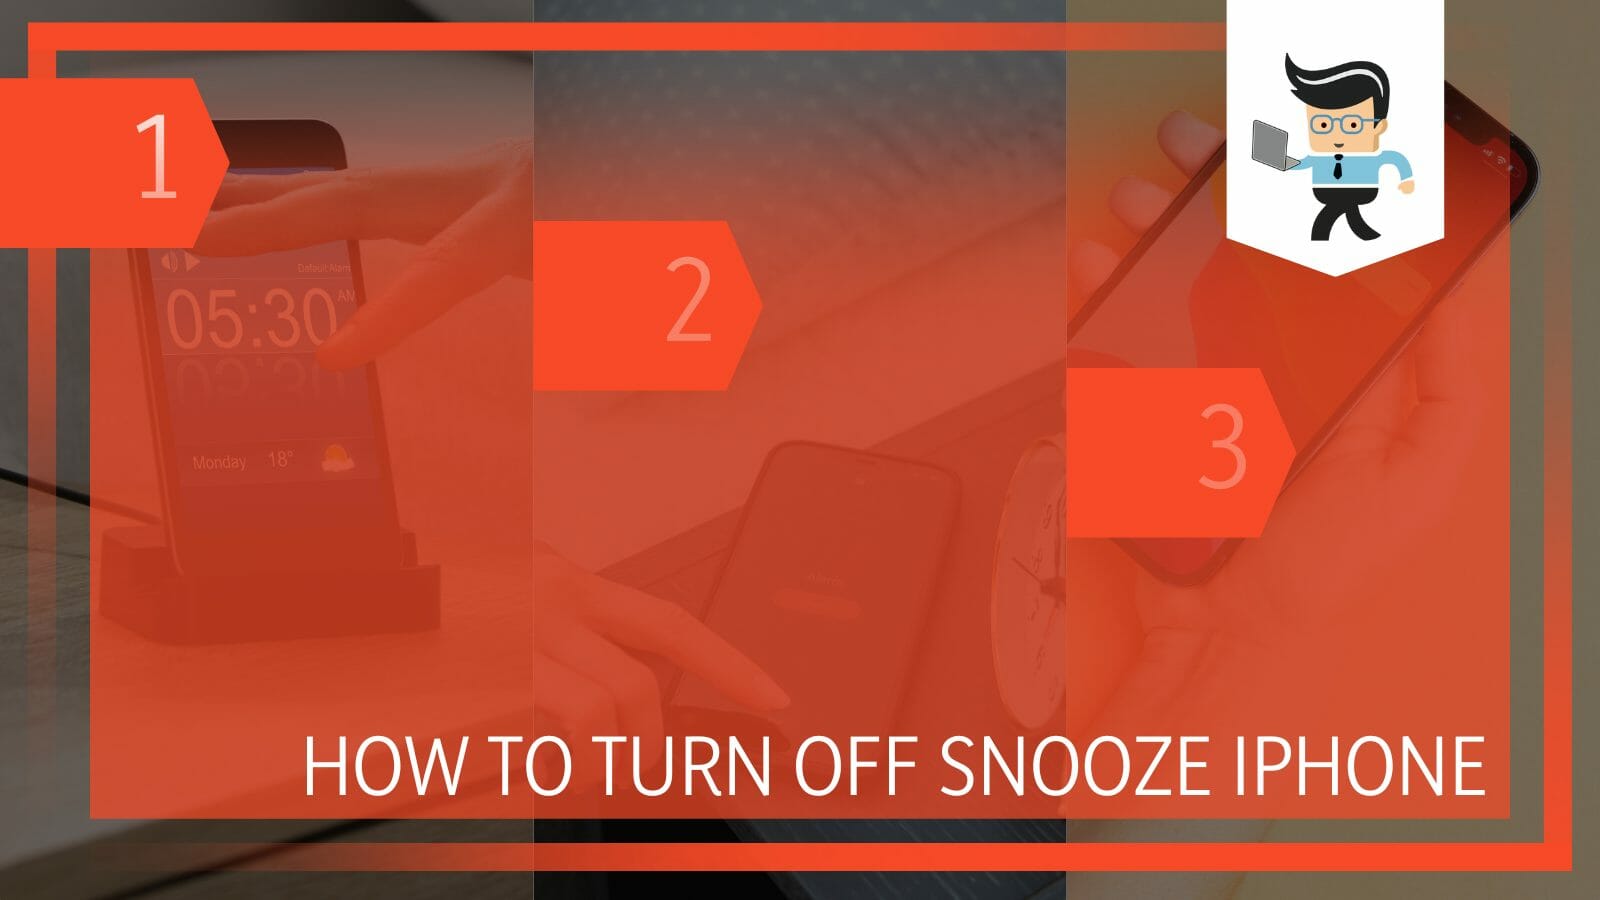 How To Turn Off Snooze iPhone